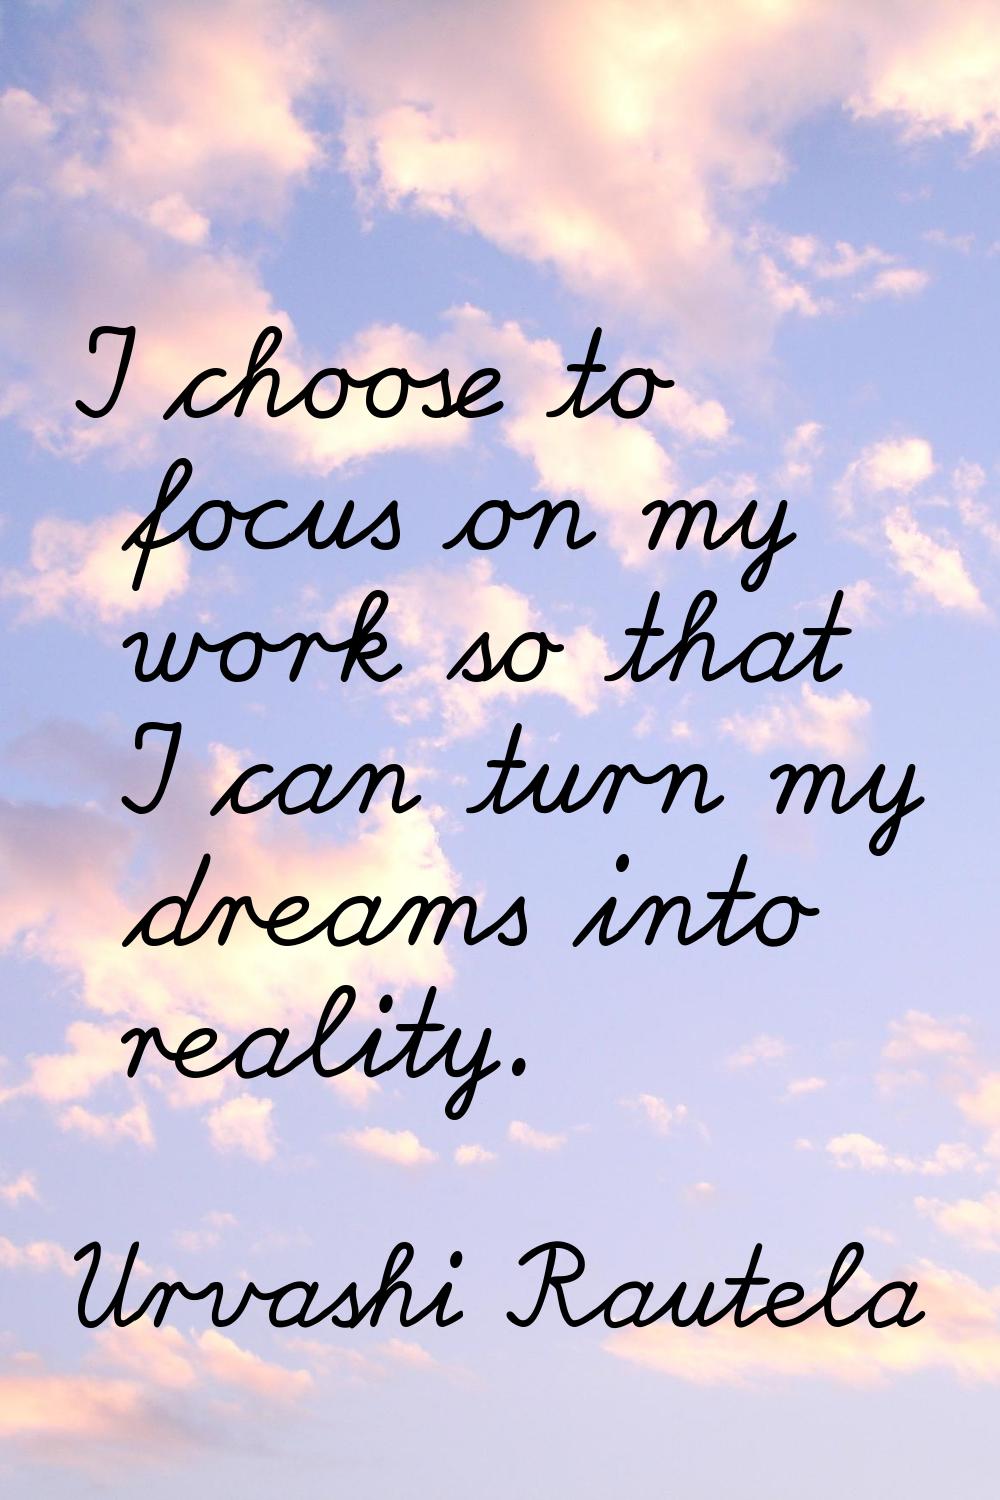 I choose to focus on my work so that I can turn my dreams into reality.